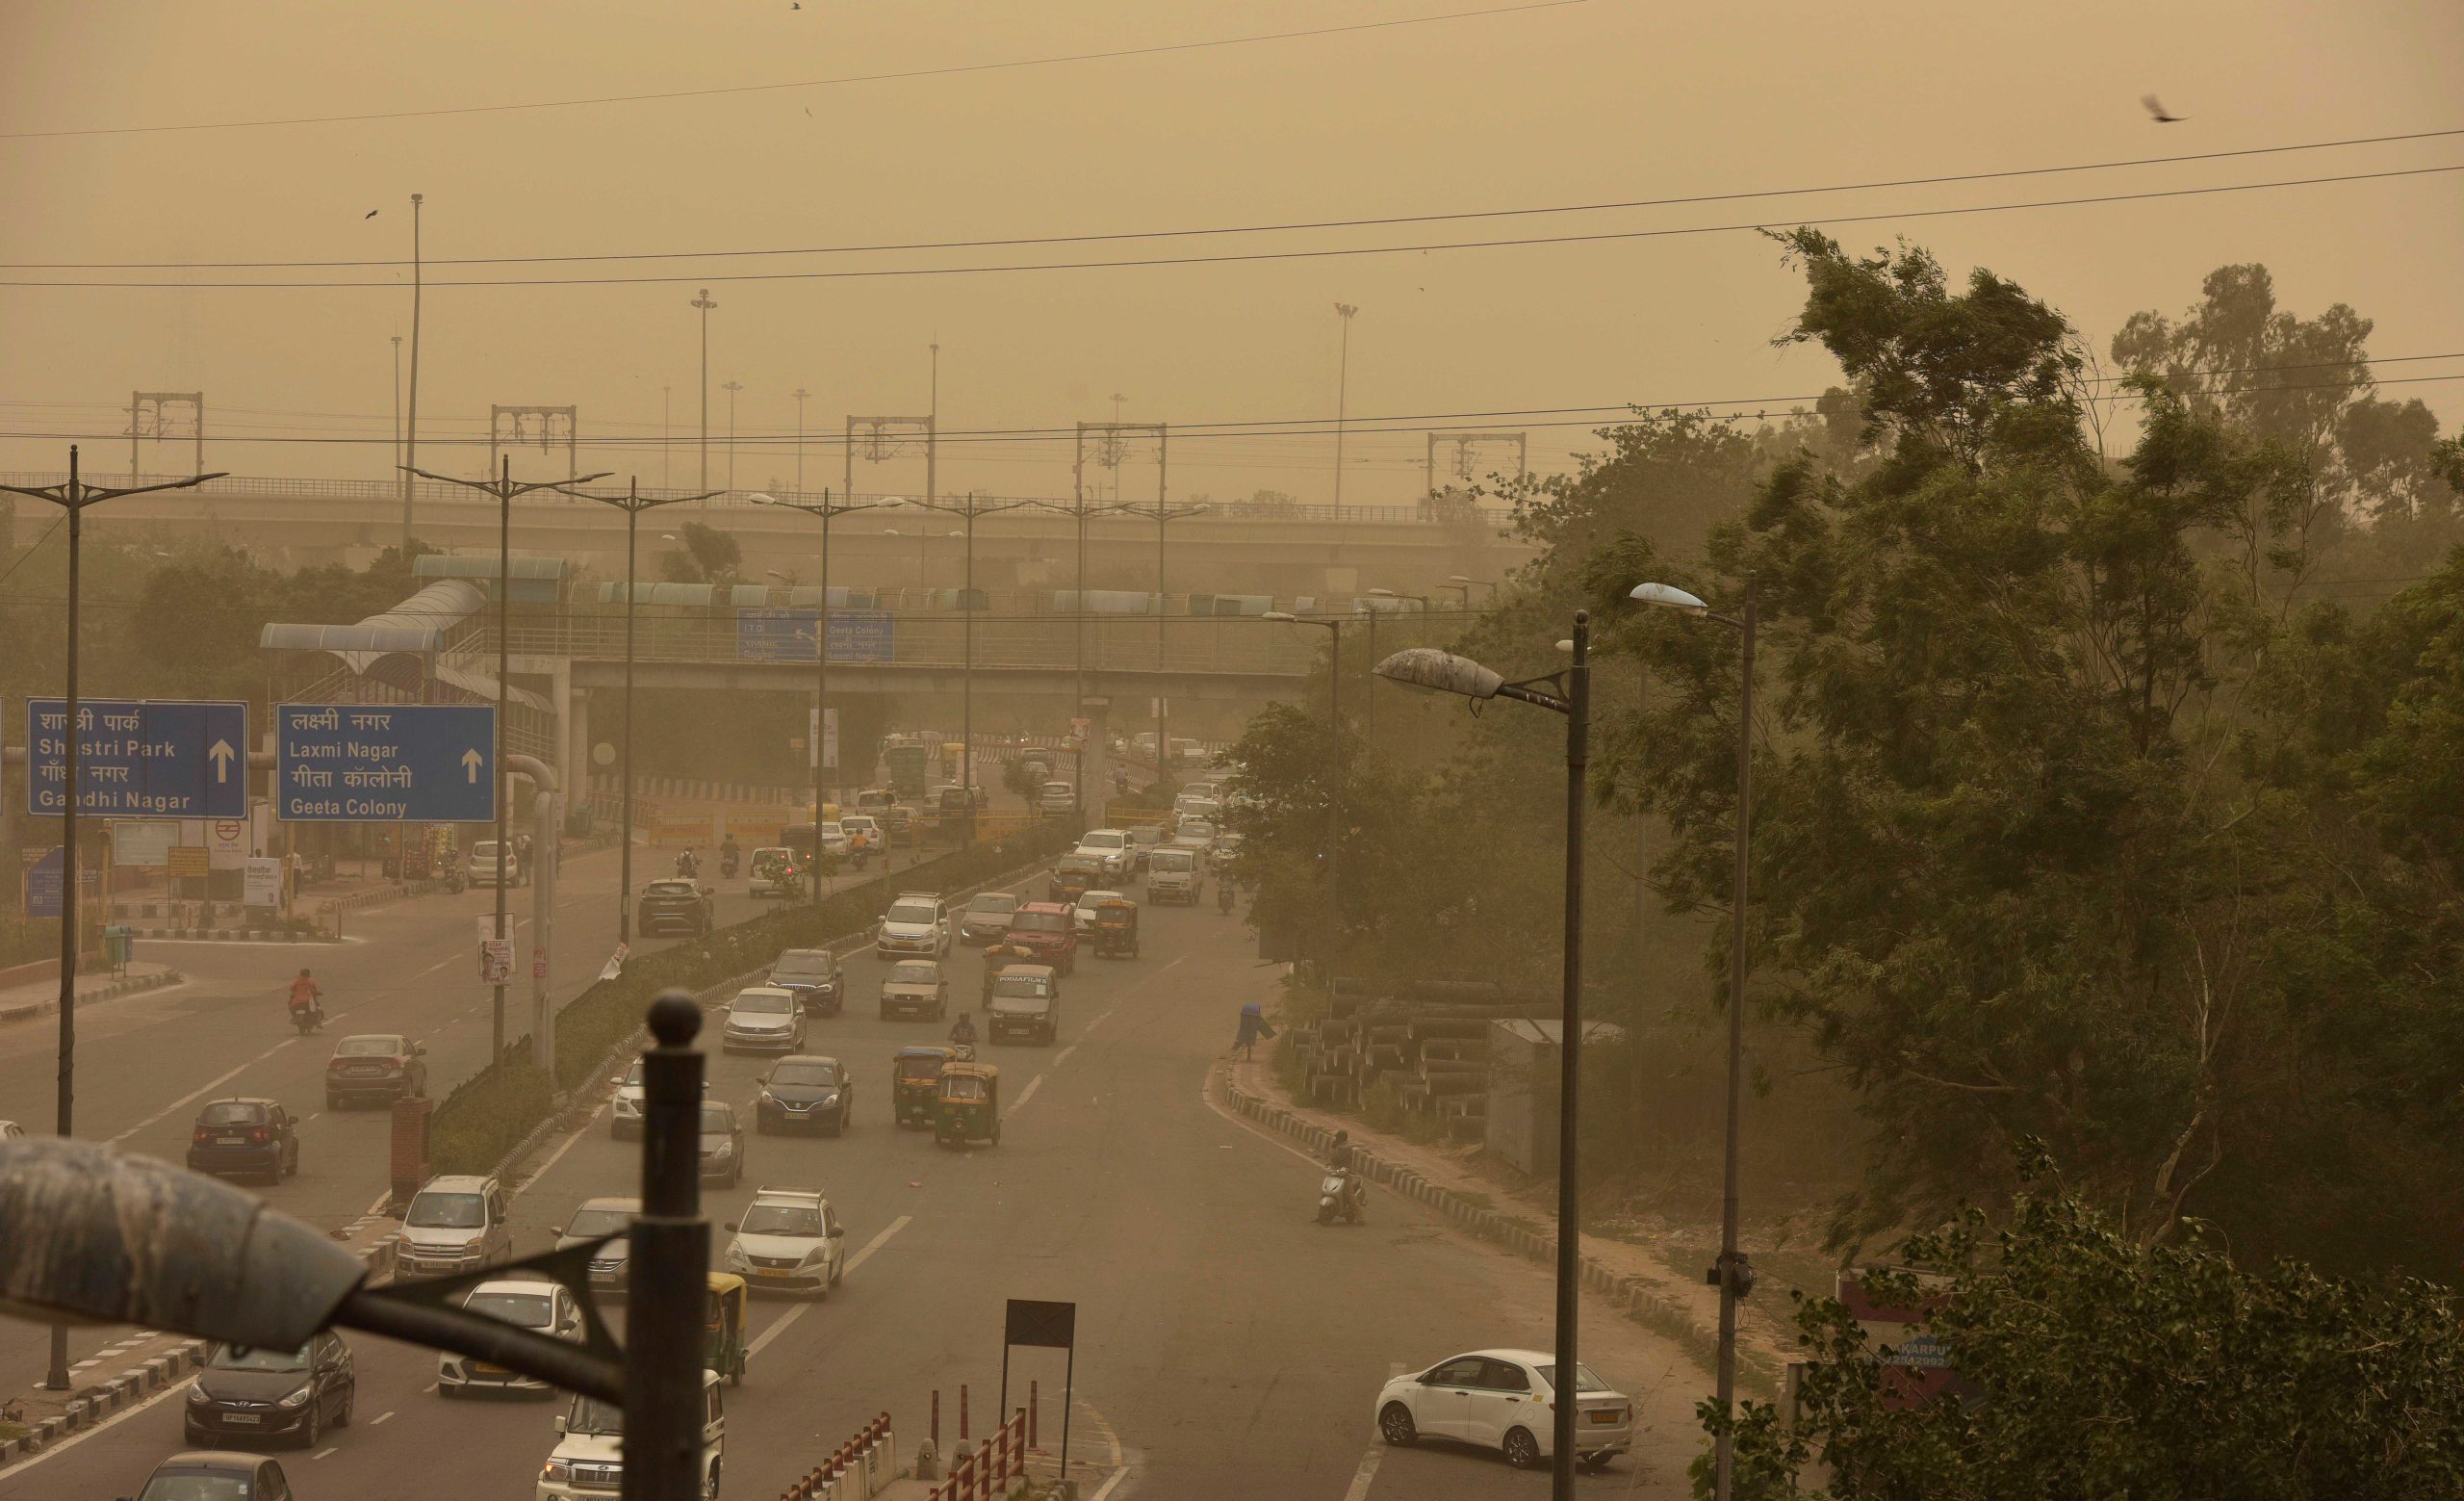 Delhi to run anti-dust campaign from October 7